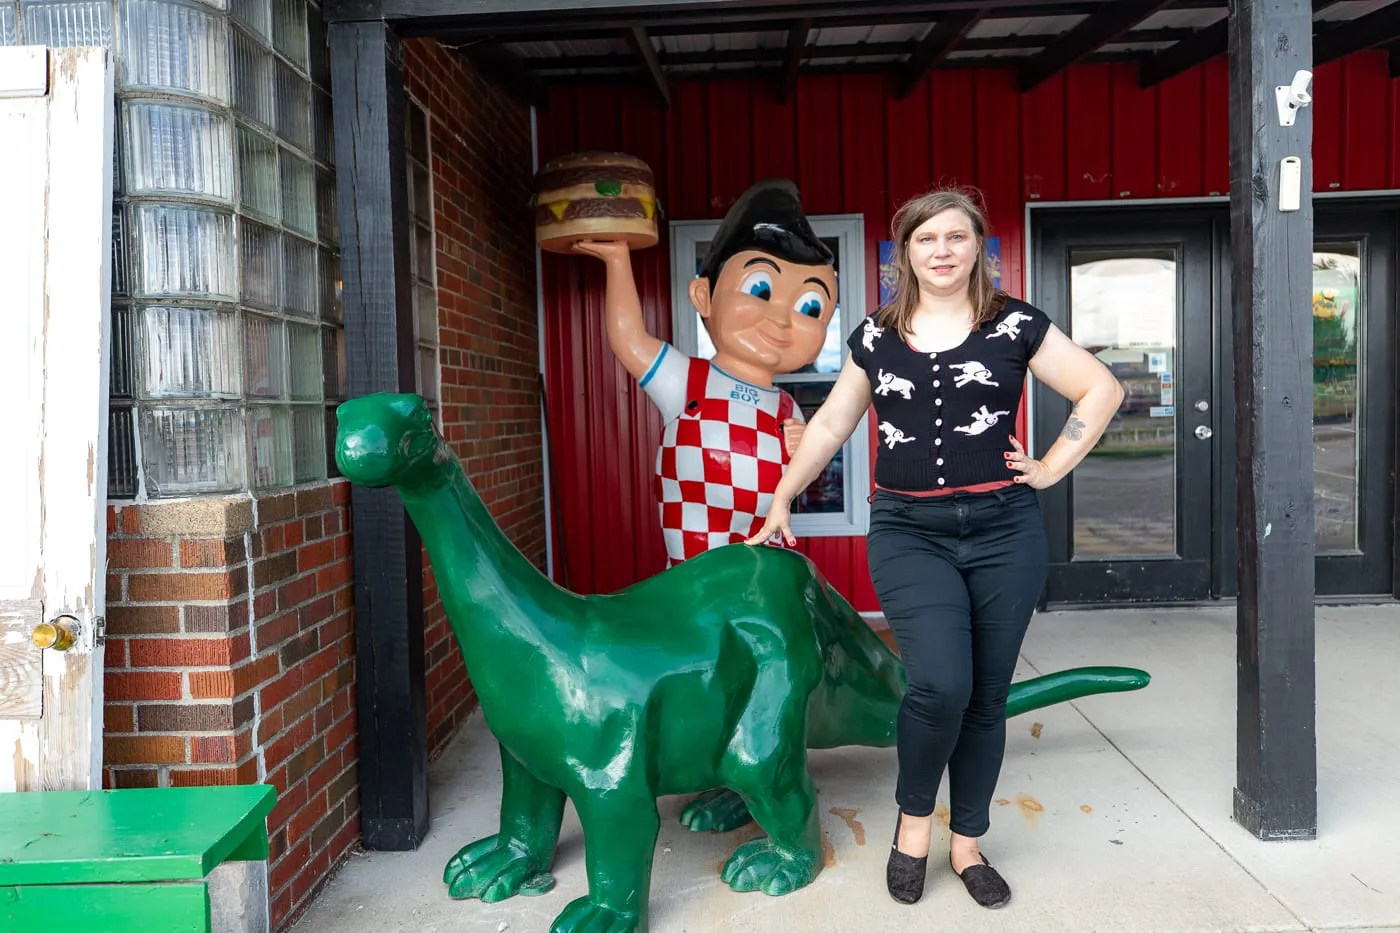 Dinosaur Roadside Attractions - Big Boy statue and Sinclair Dinosaur at the Pink Elephant Antique Mall in Livingston, Illinois - Route 66 Roadside Attraction